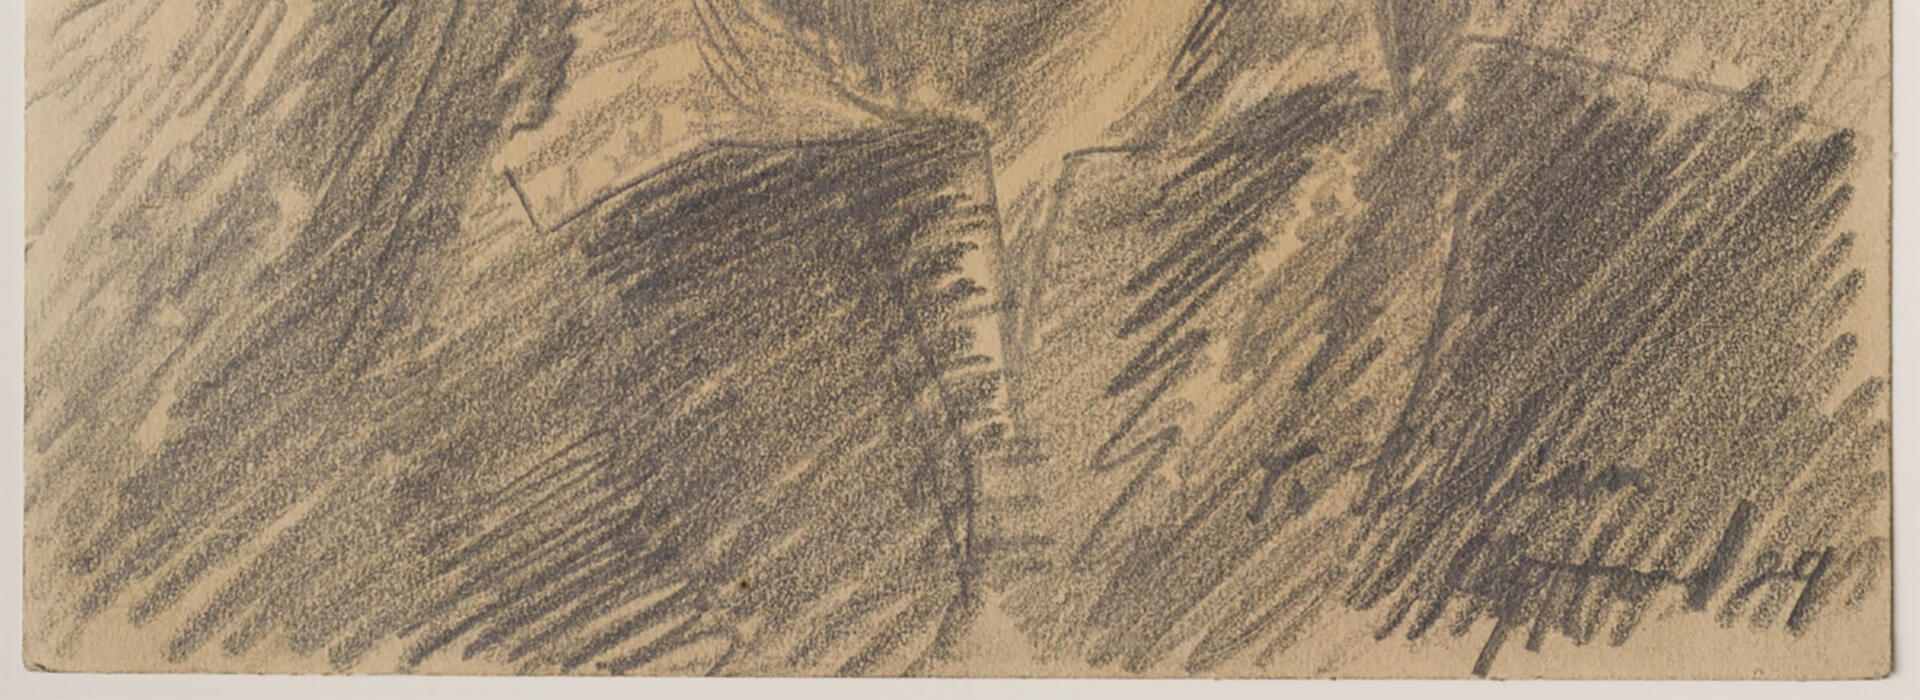 Clyfford Still, PD-12, 1929, graphite on paper (detail). © City and County of Denver.